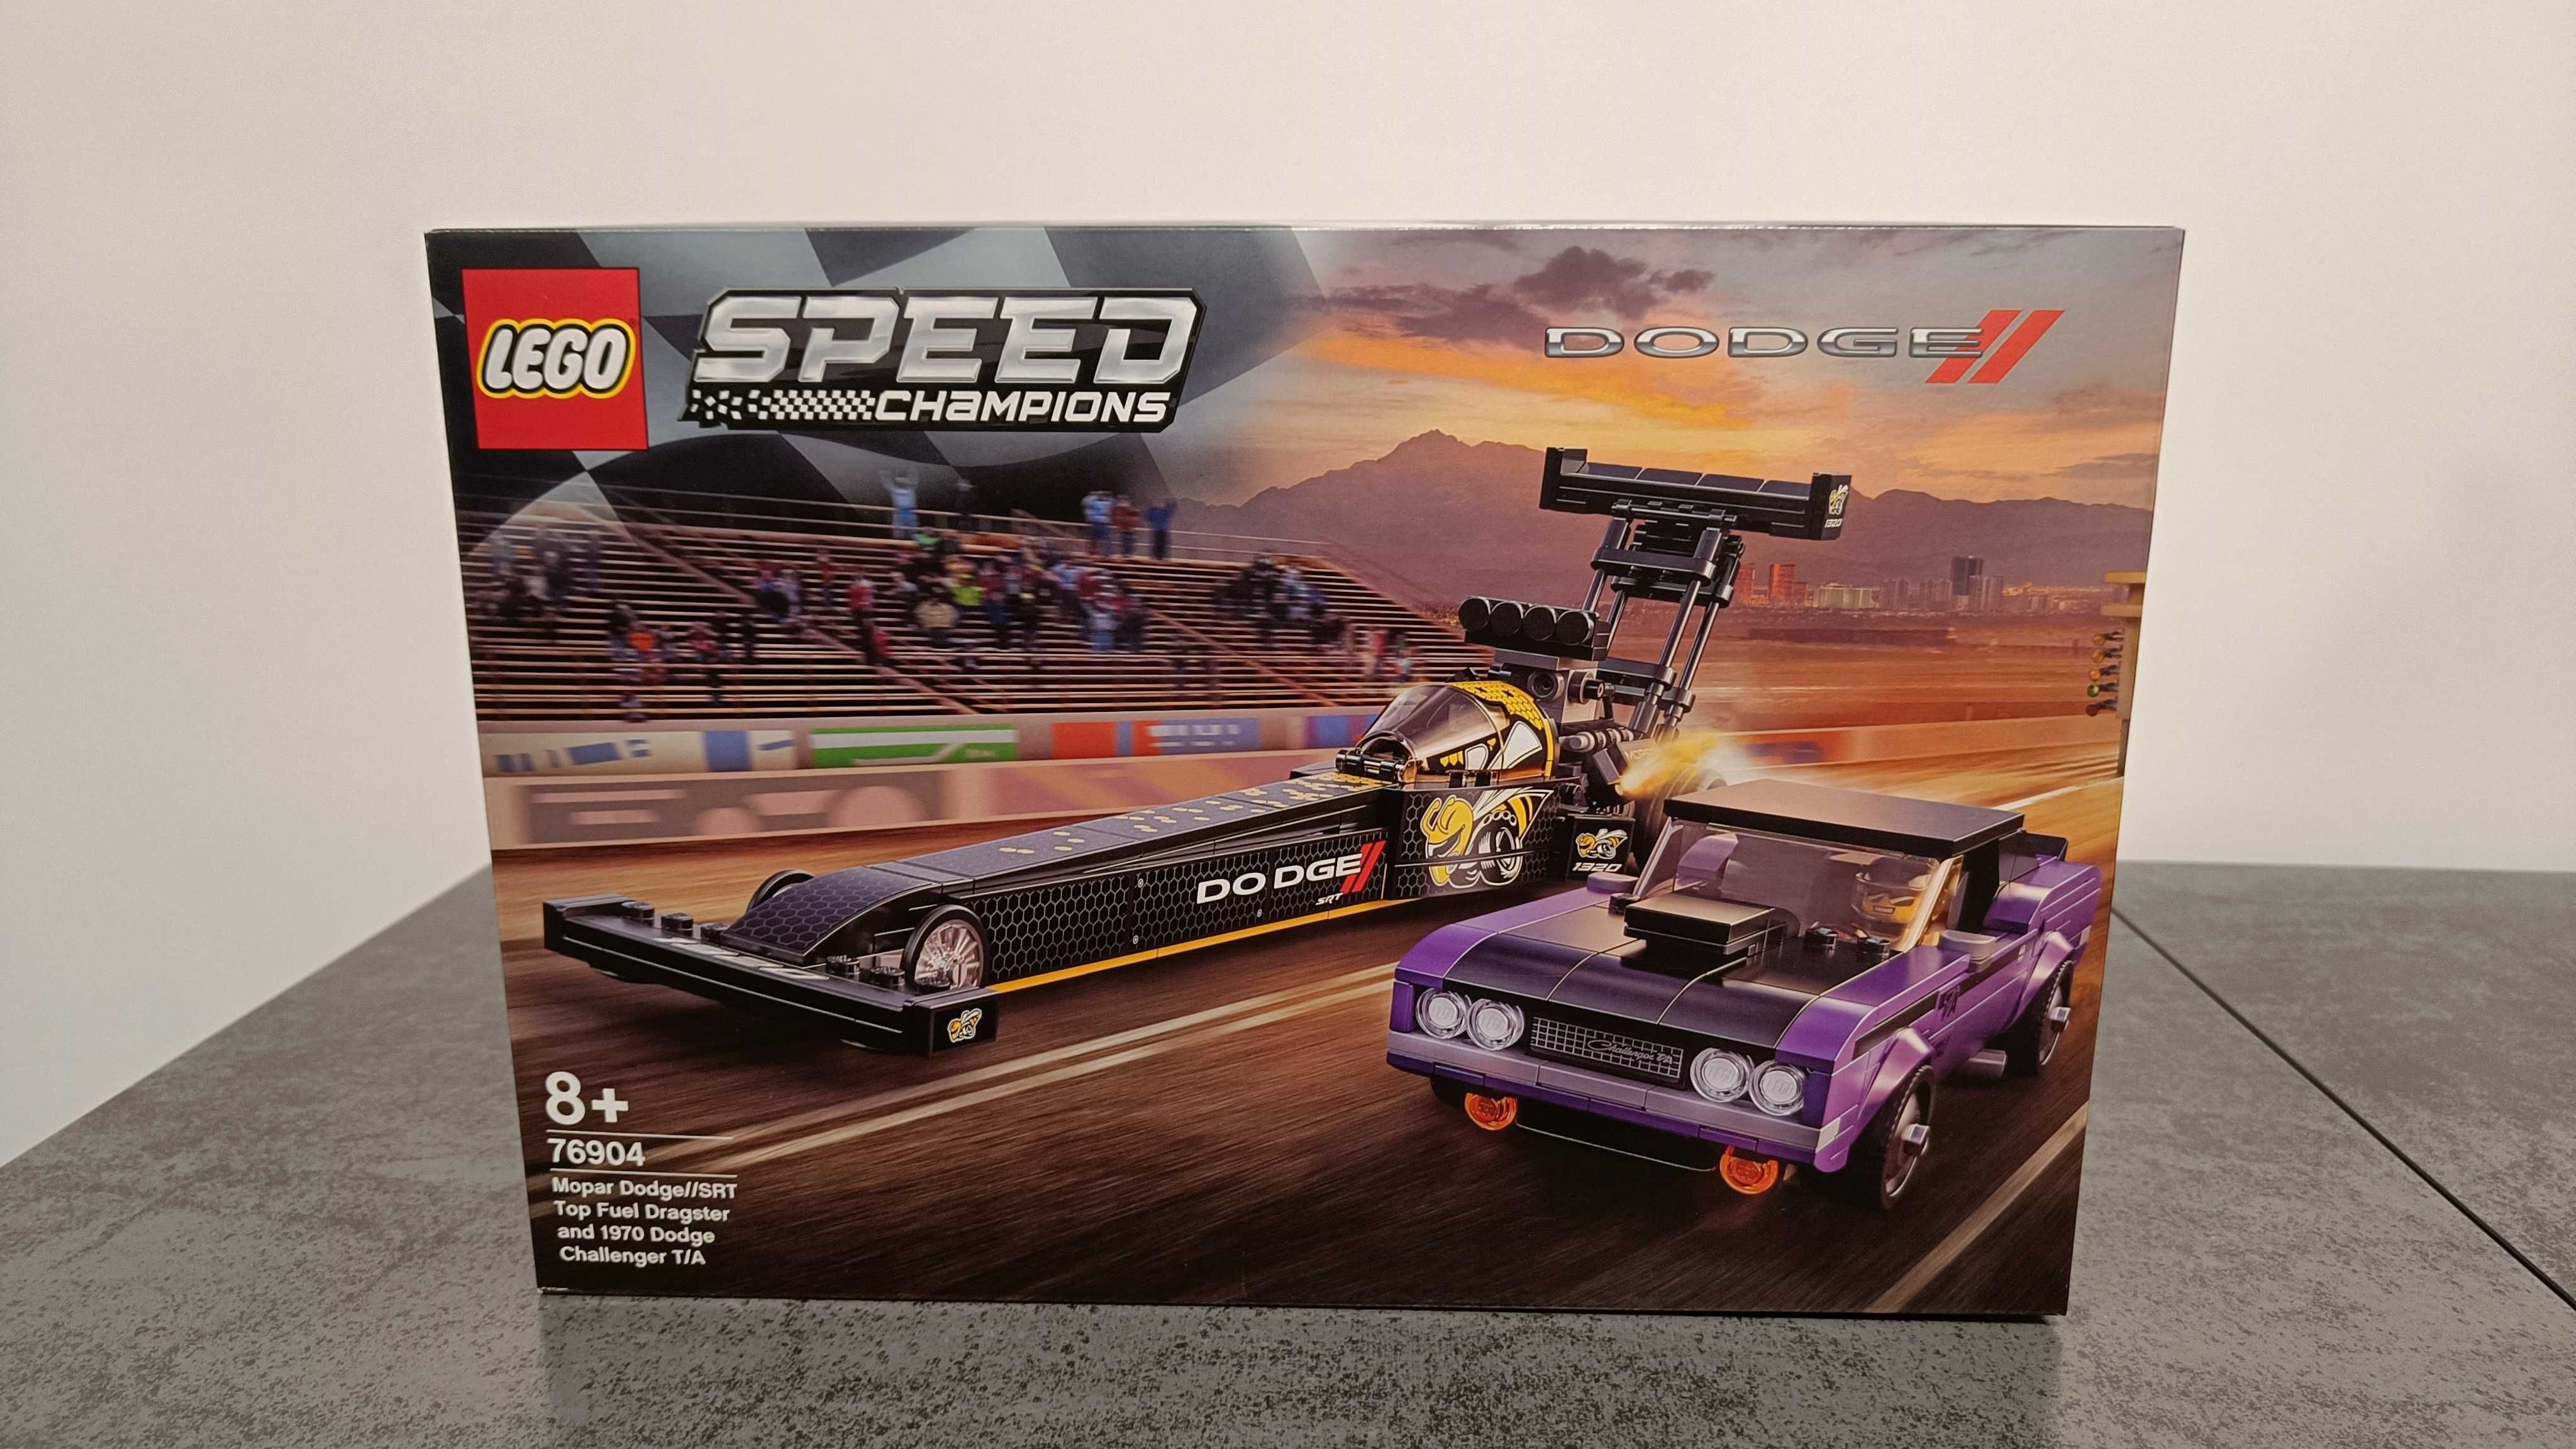 LEGO 76904 Speed Champions - Mopar Dragster and 1970 Dodge Challenger